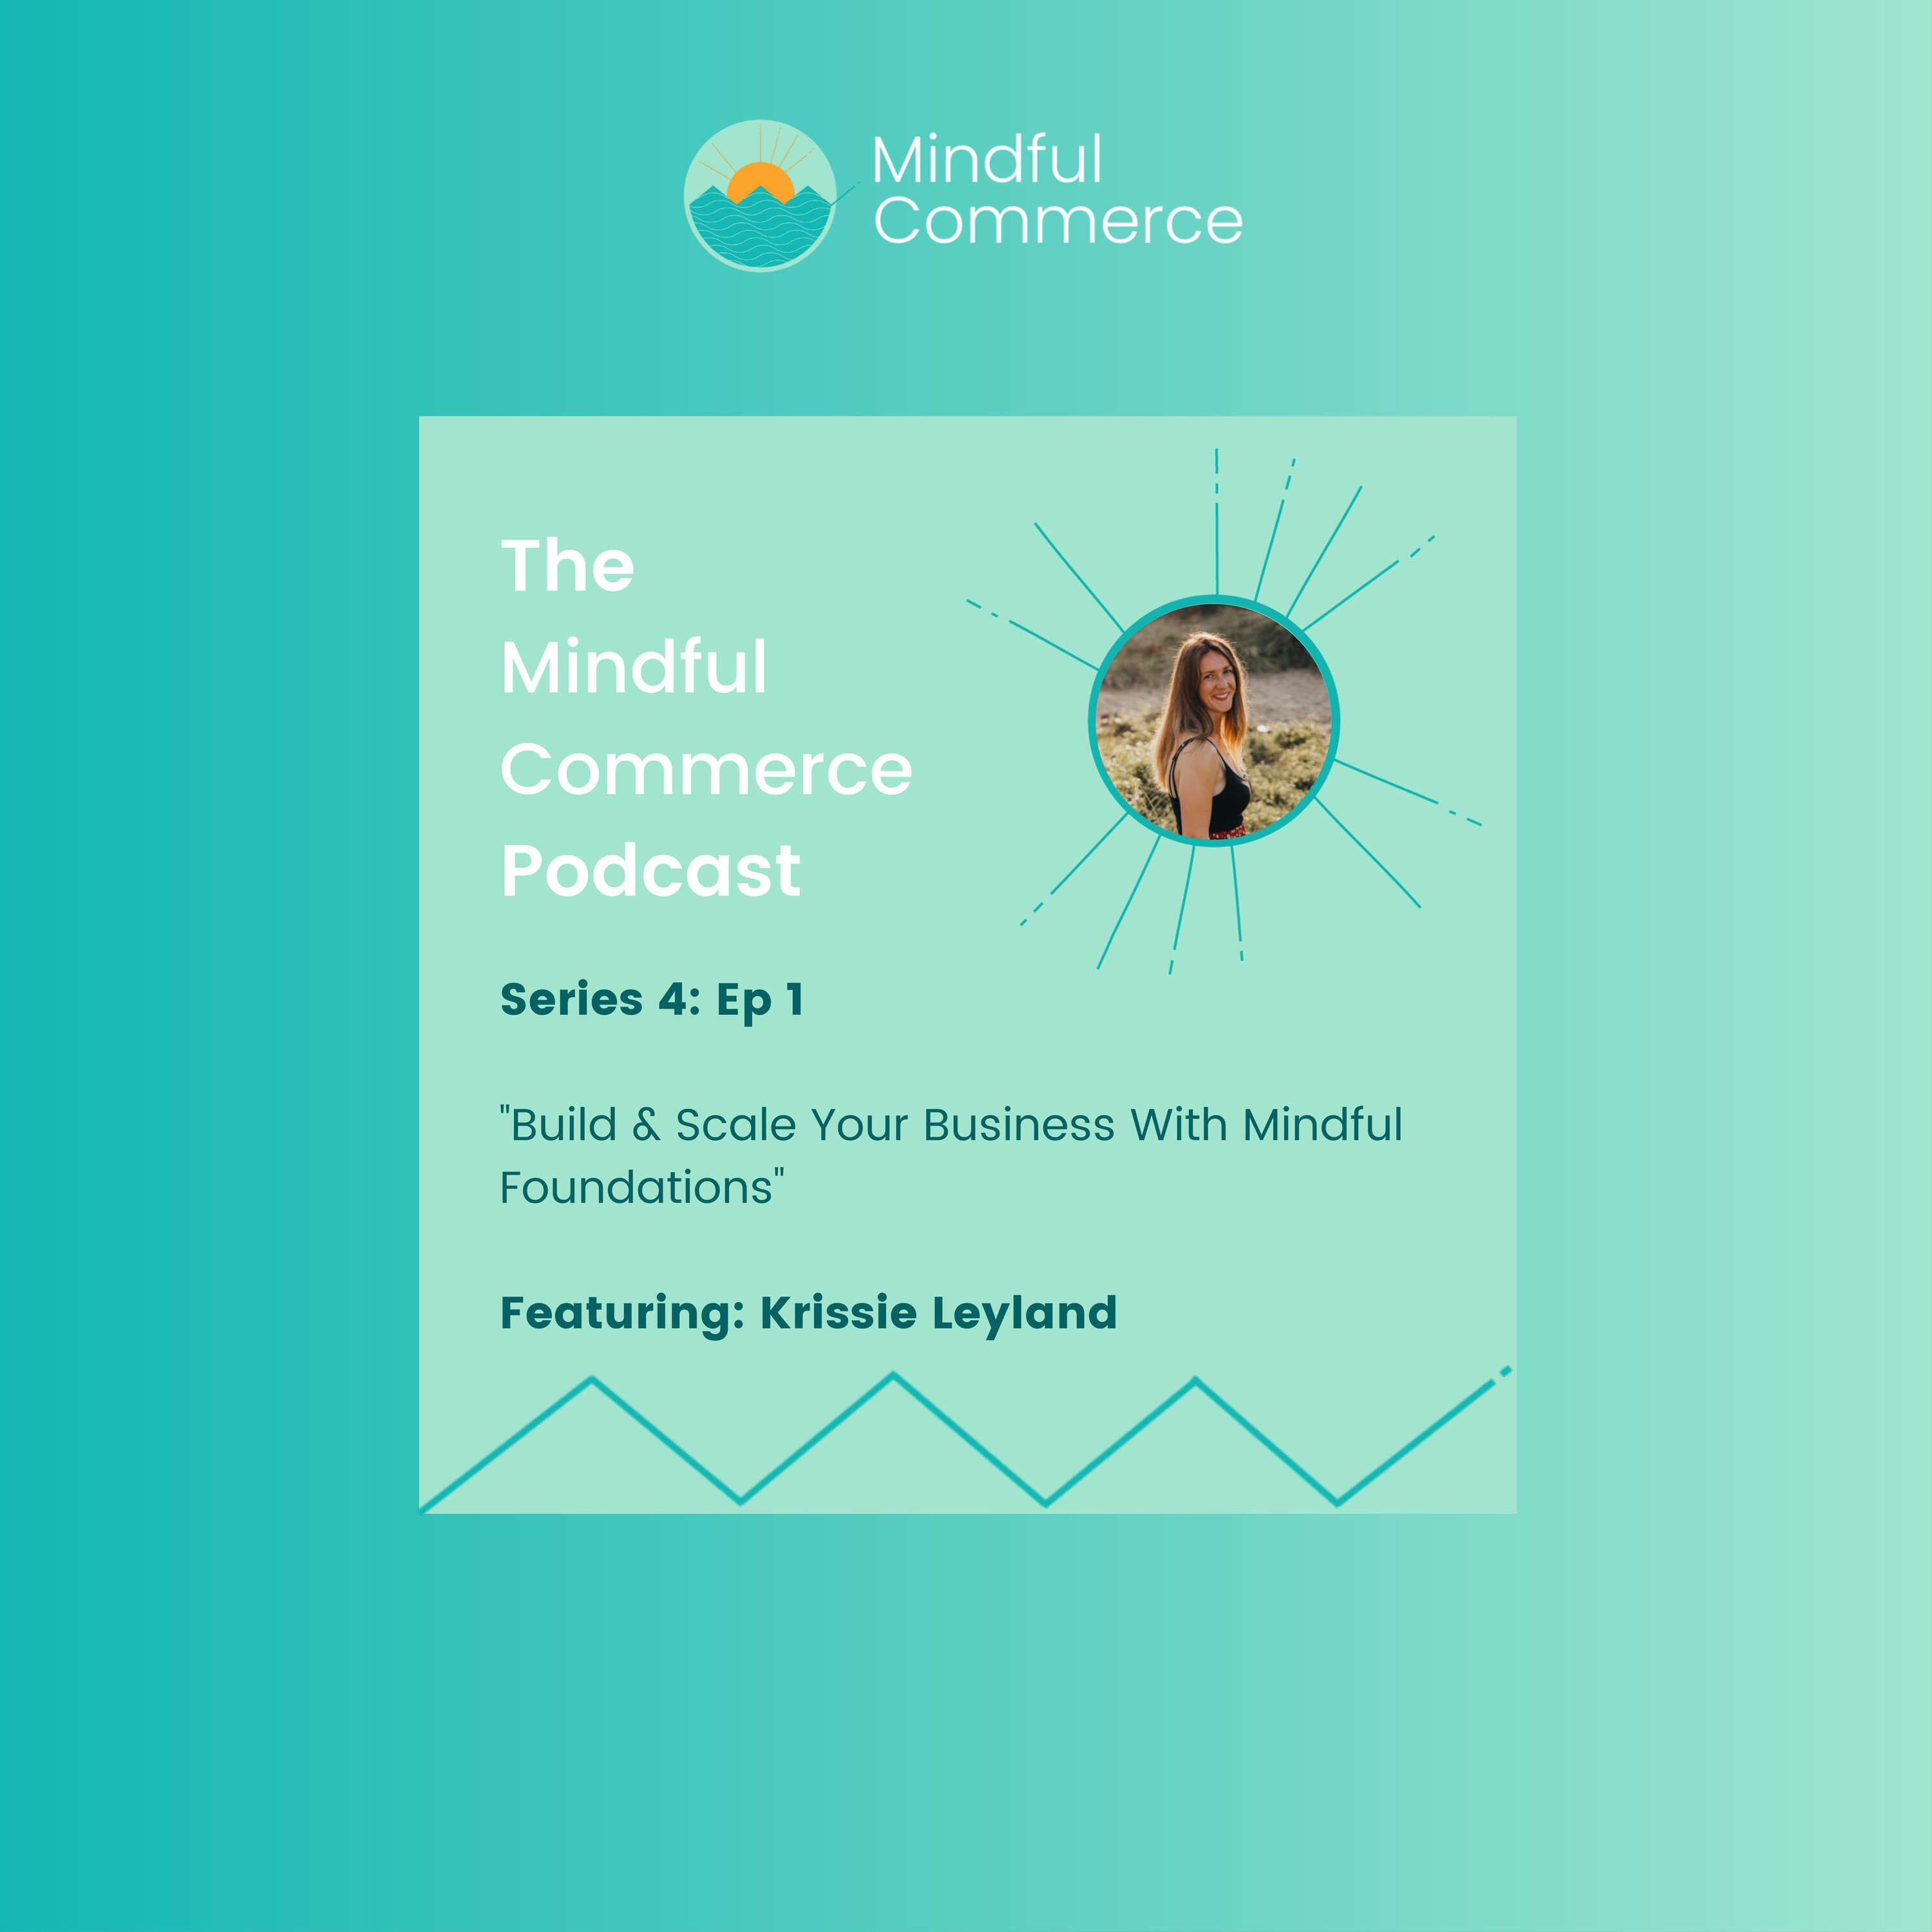 Harness the Power of Technology to Build & Scale an Ecommerce Business With Mindful Foundations